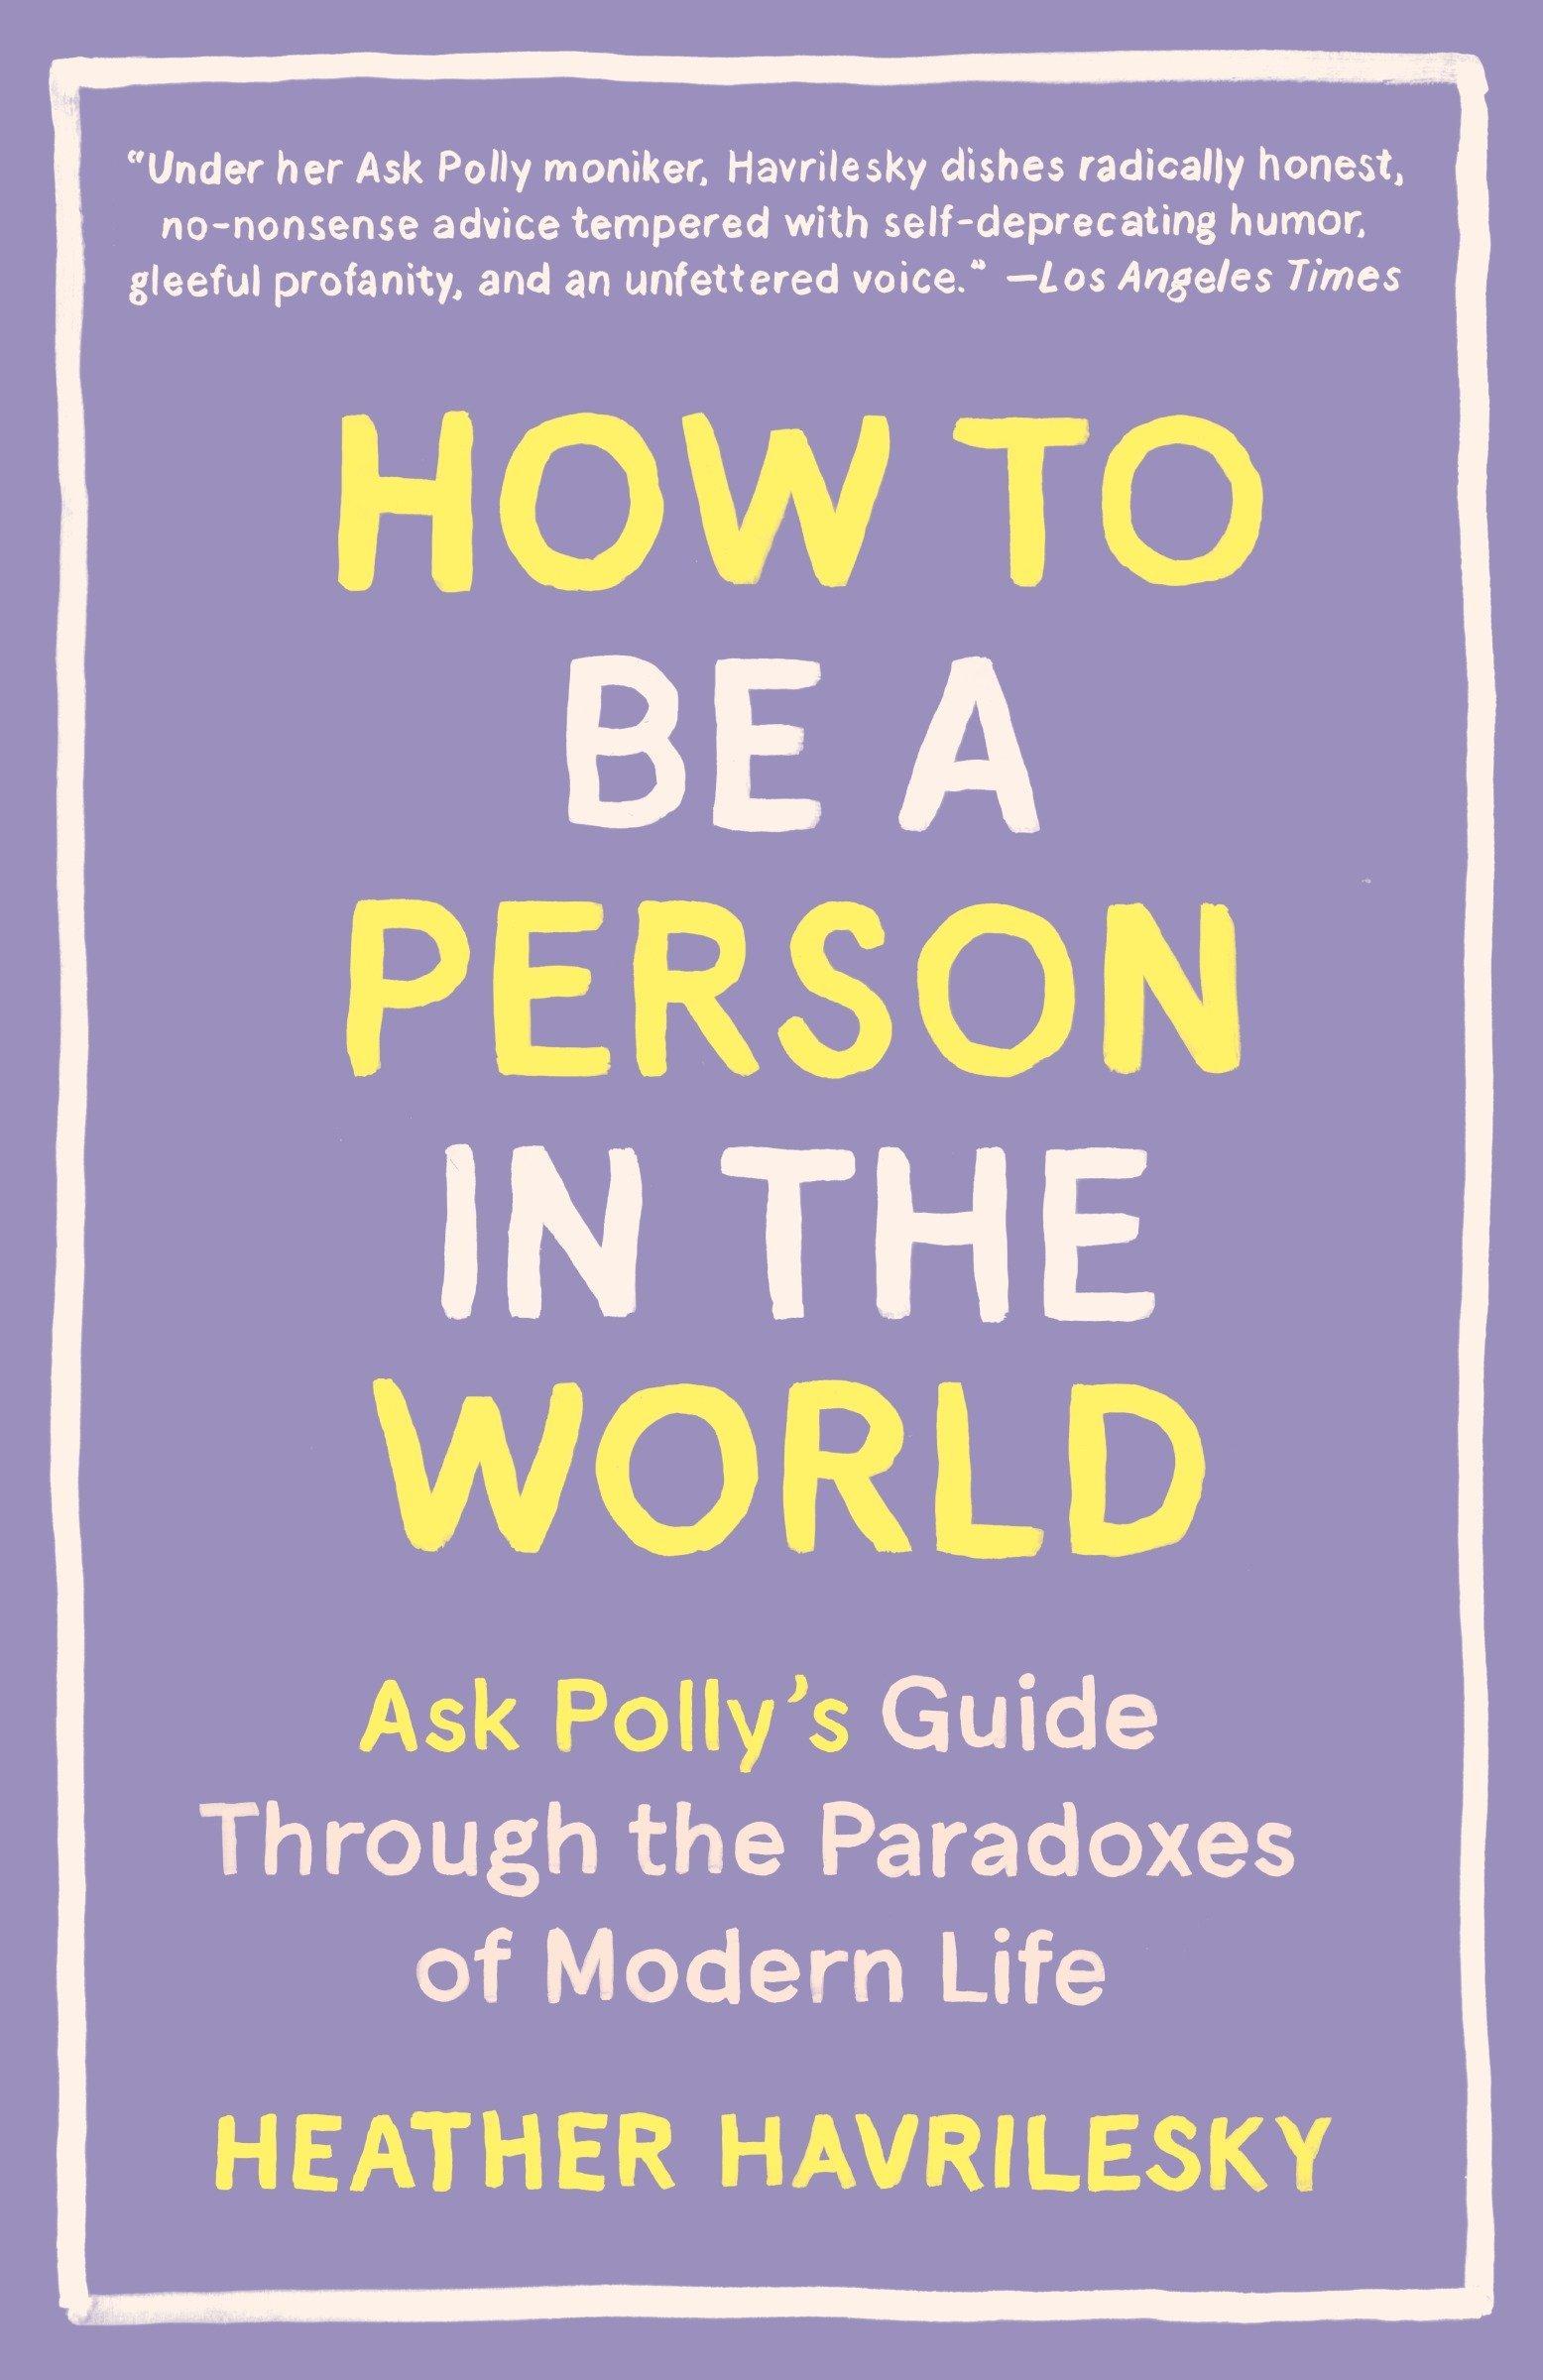 Book: How to Be a Person in the World Writer: Heather Havrilesky